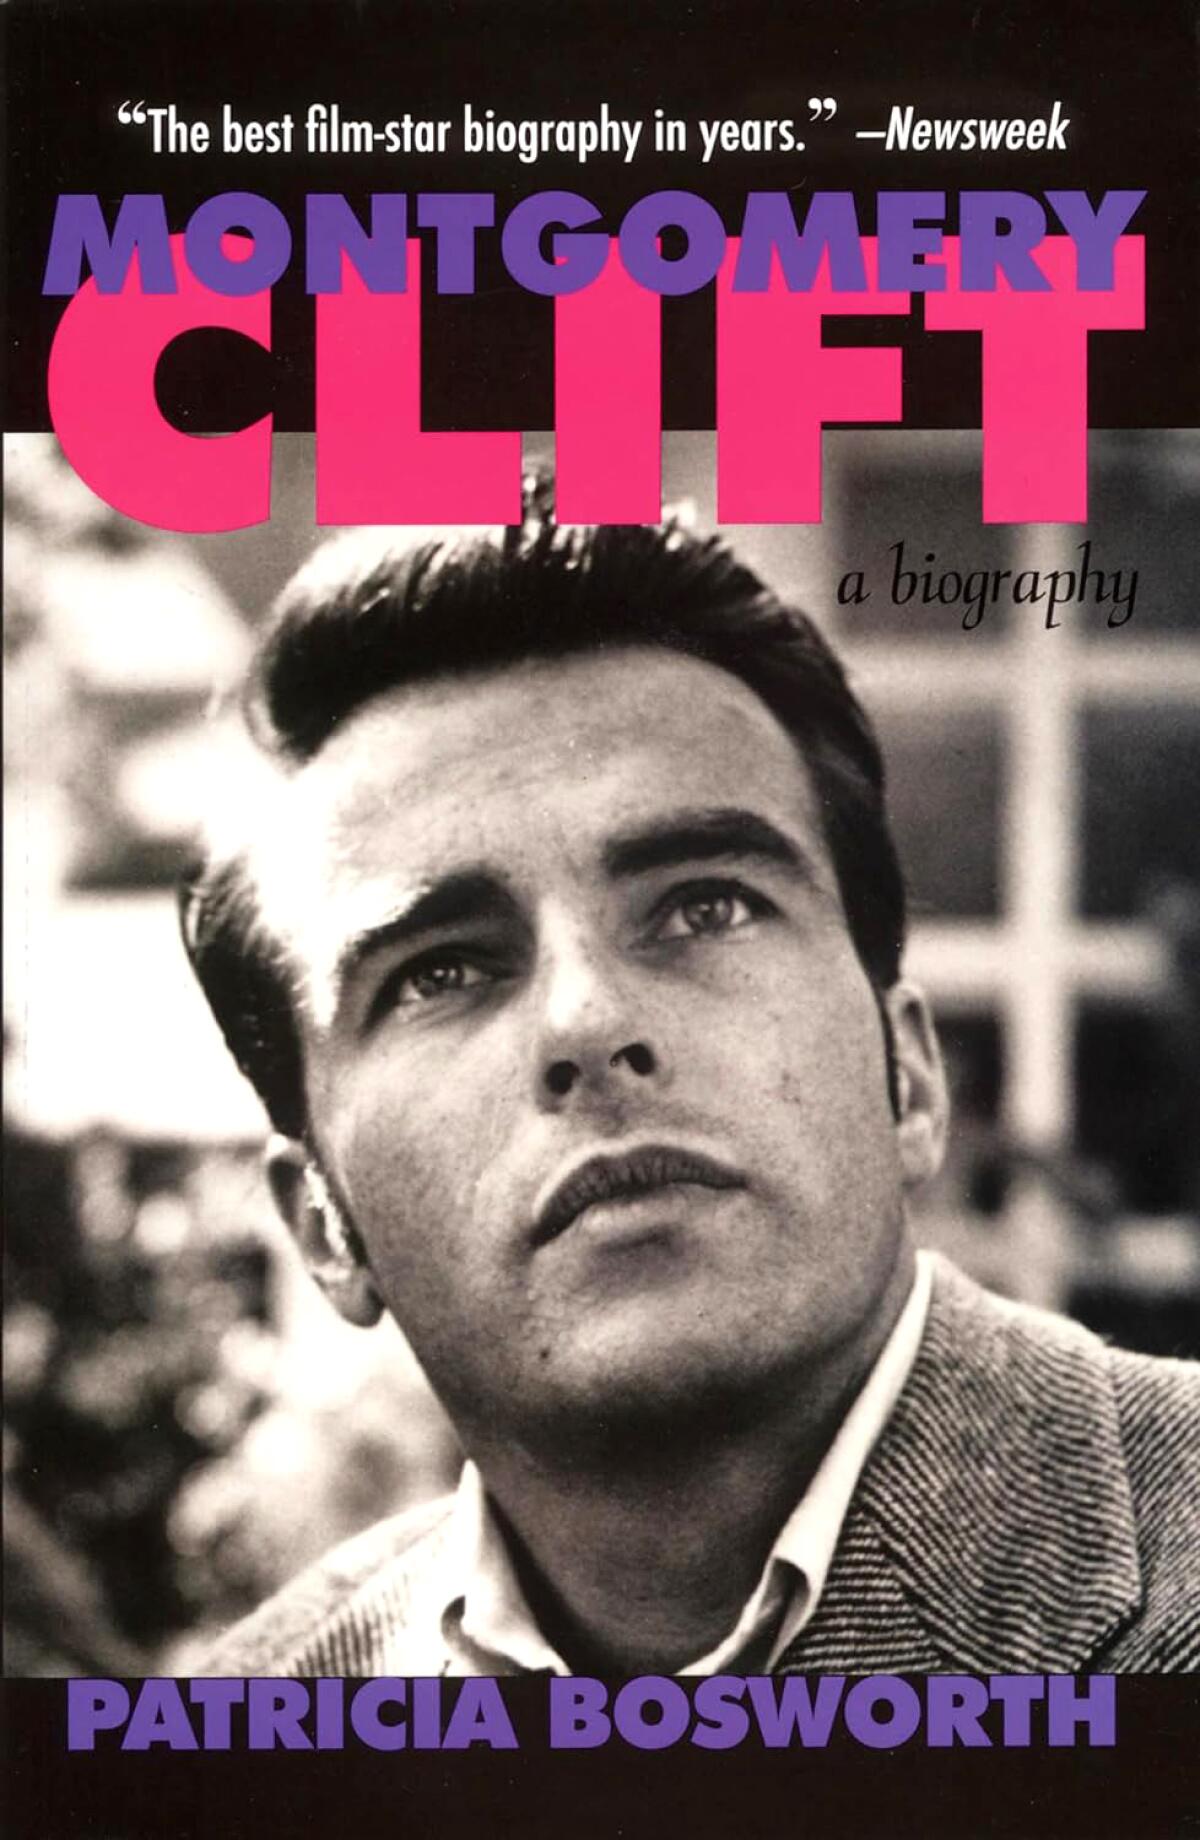 "Montgomery Clift" by Patricia Bosworth, 2004